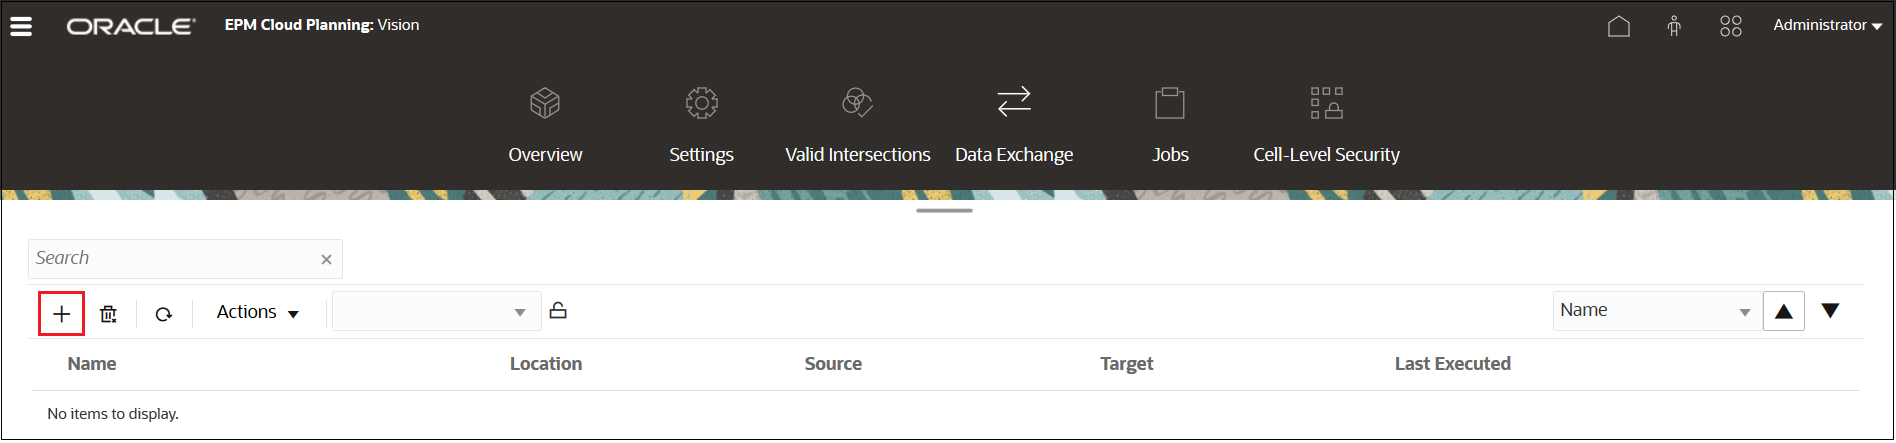 Data Exchange page with the Create Integration button selected